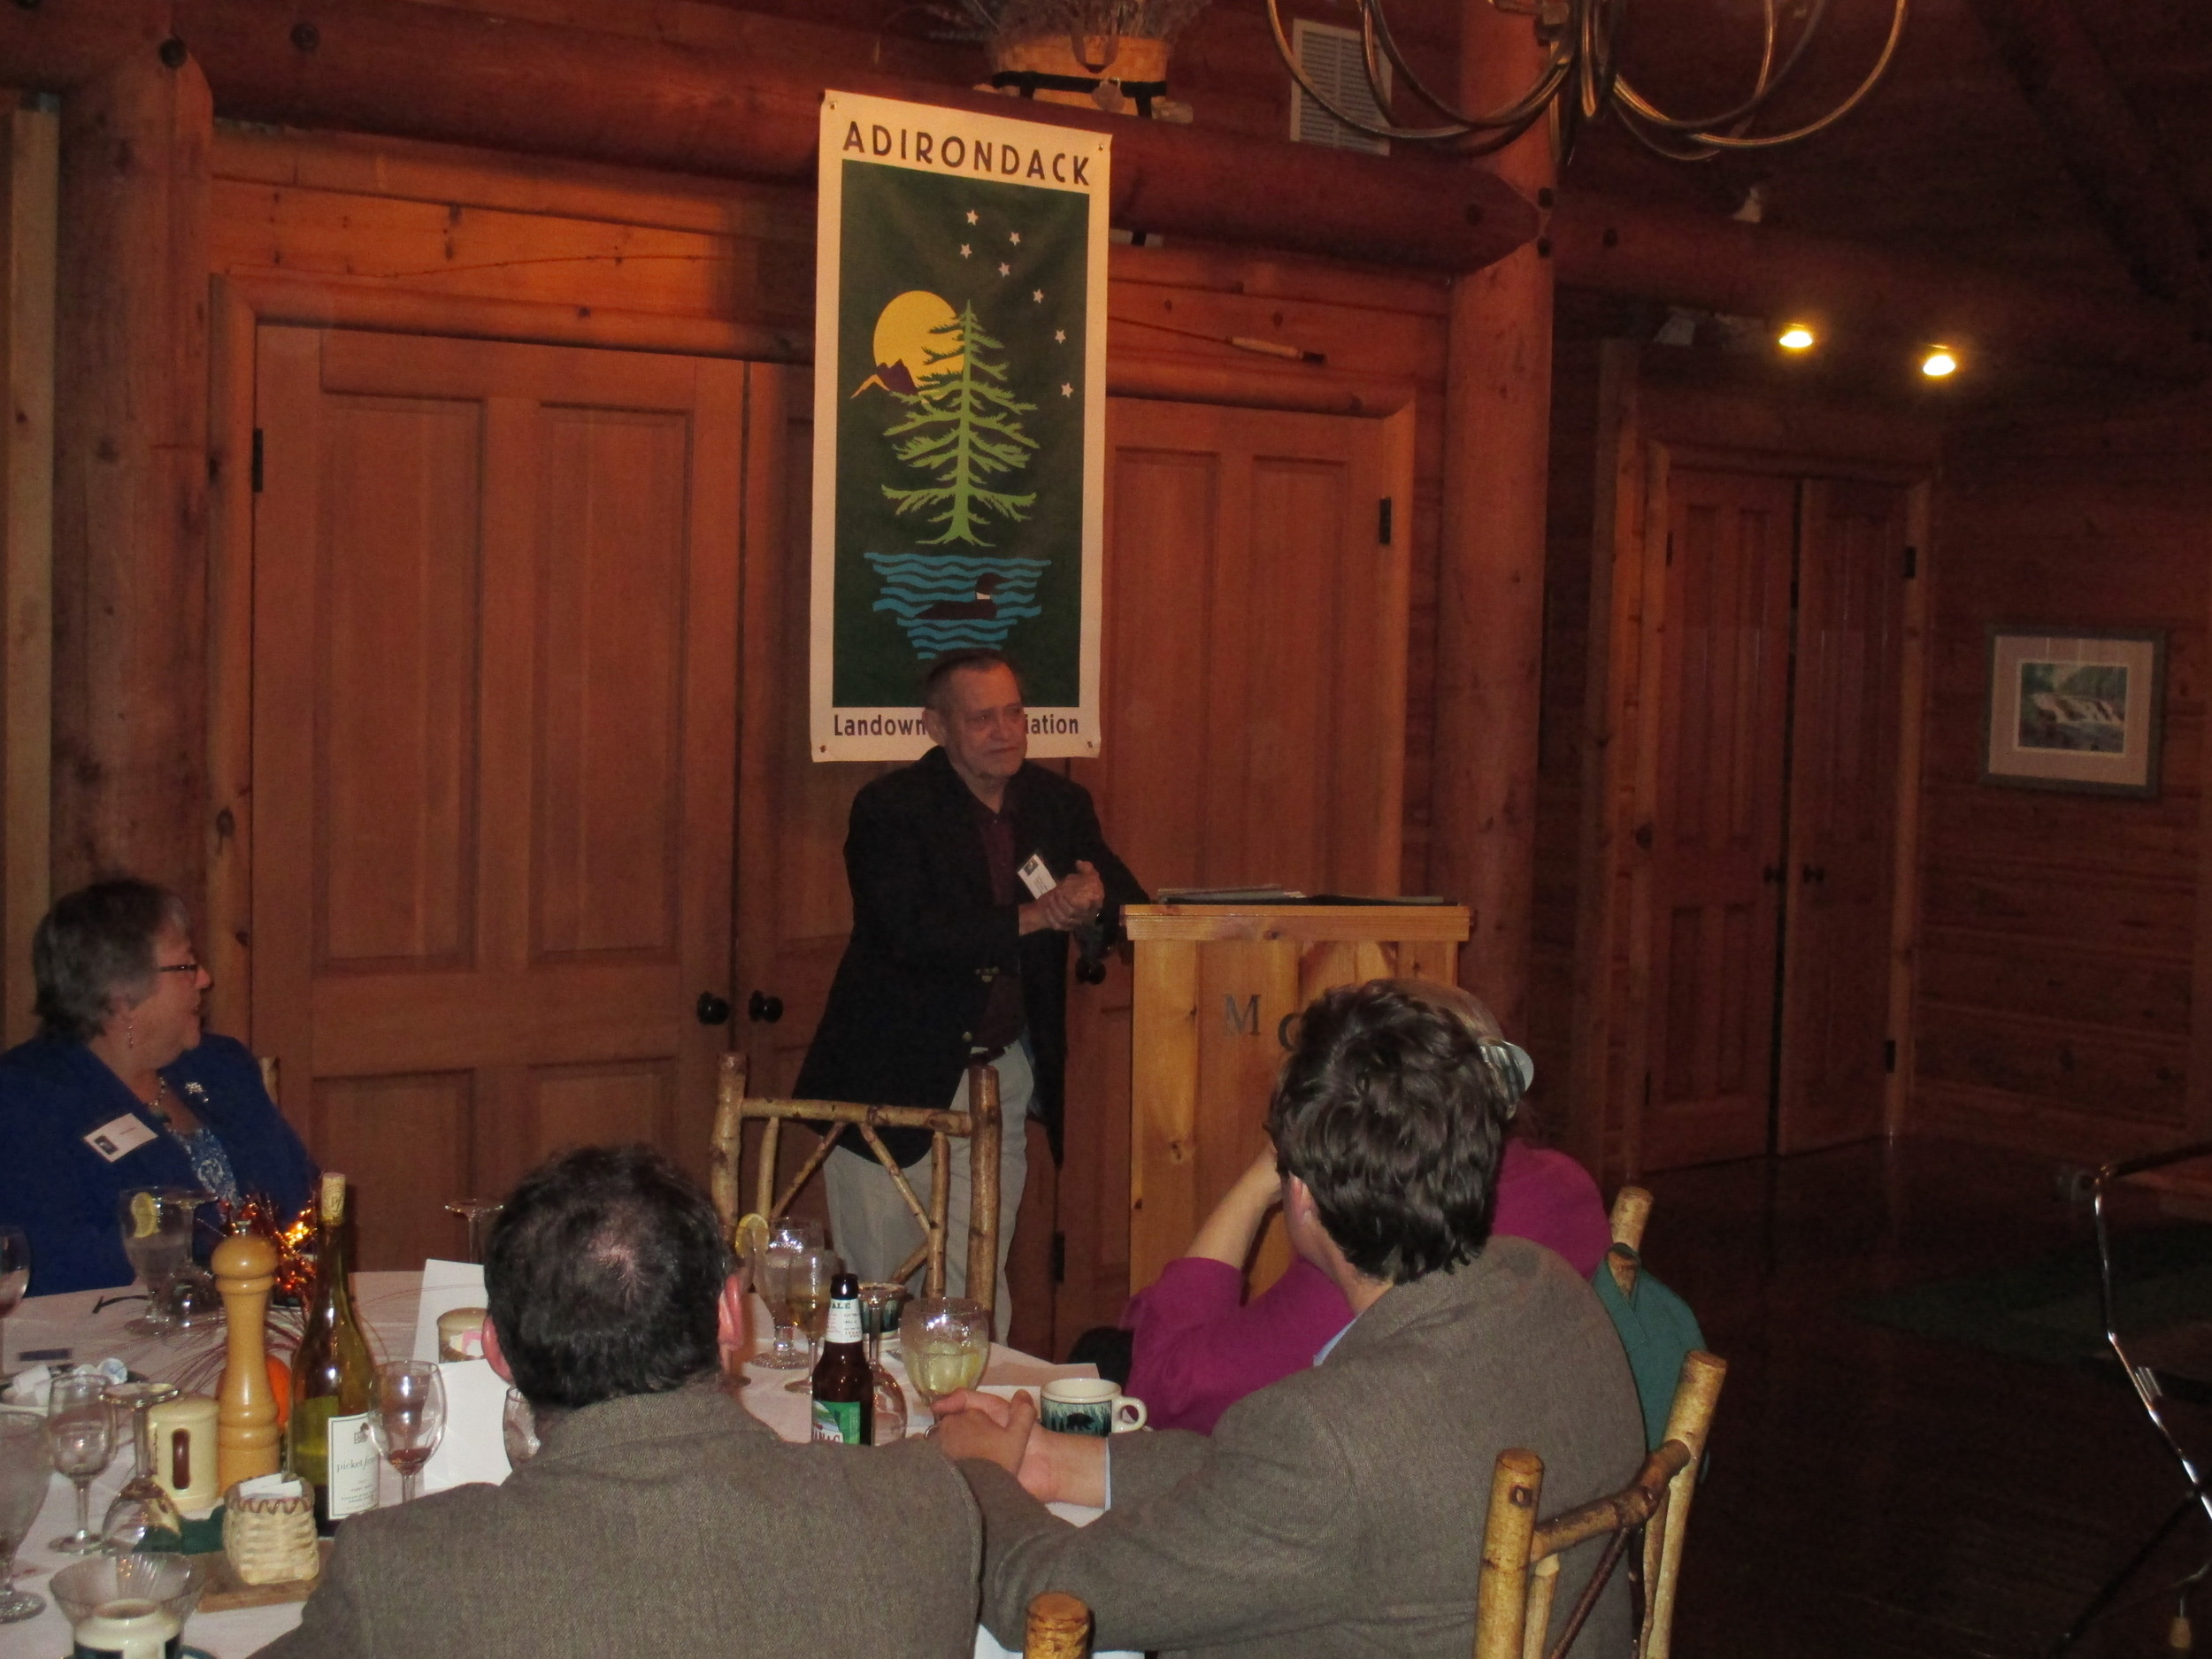   George Canon shares some thoughts on his 25 years of public service to the Adirondacks.  